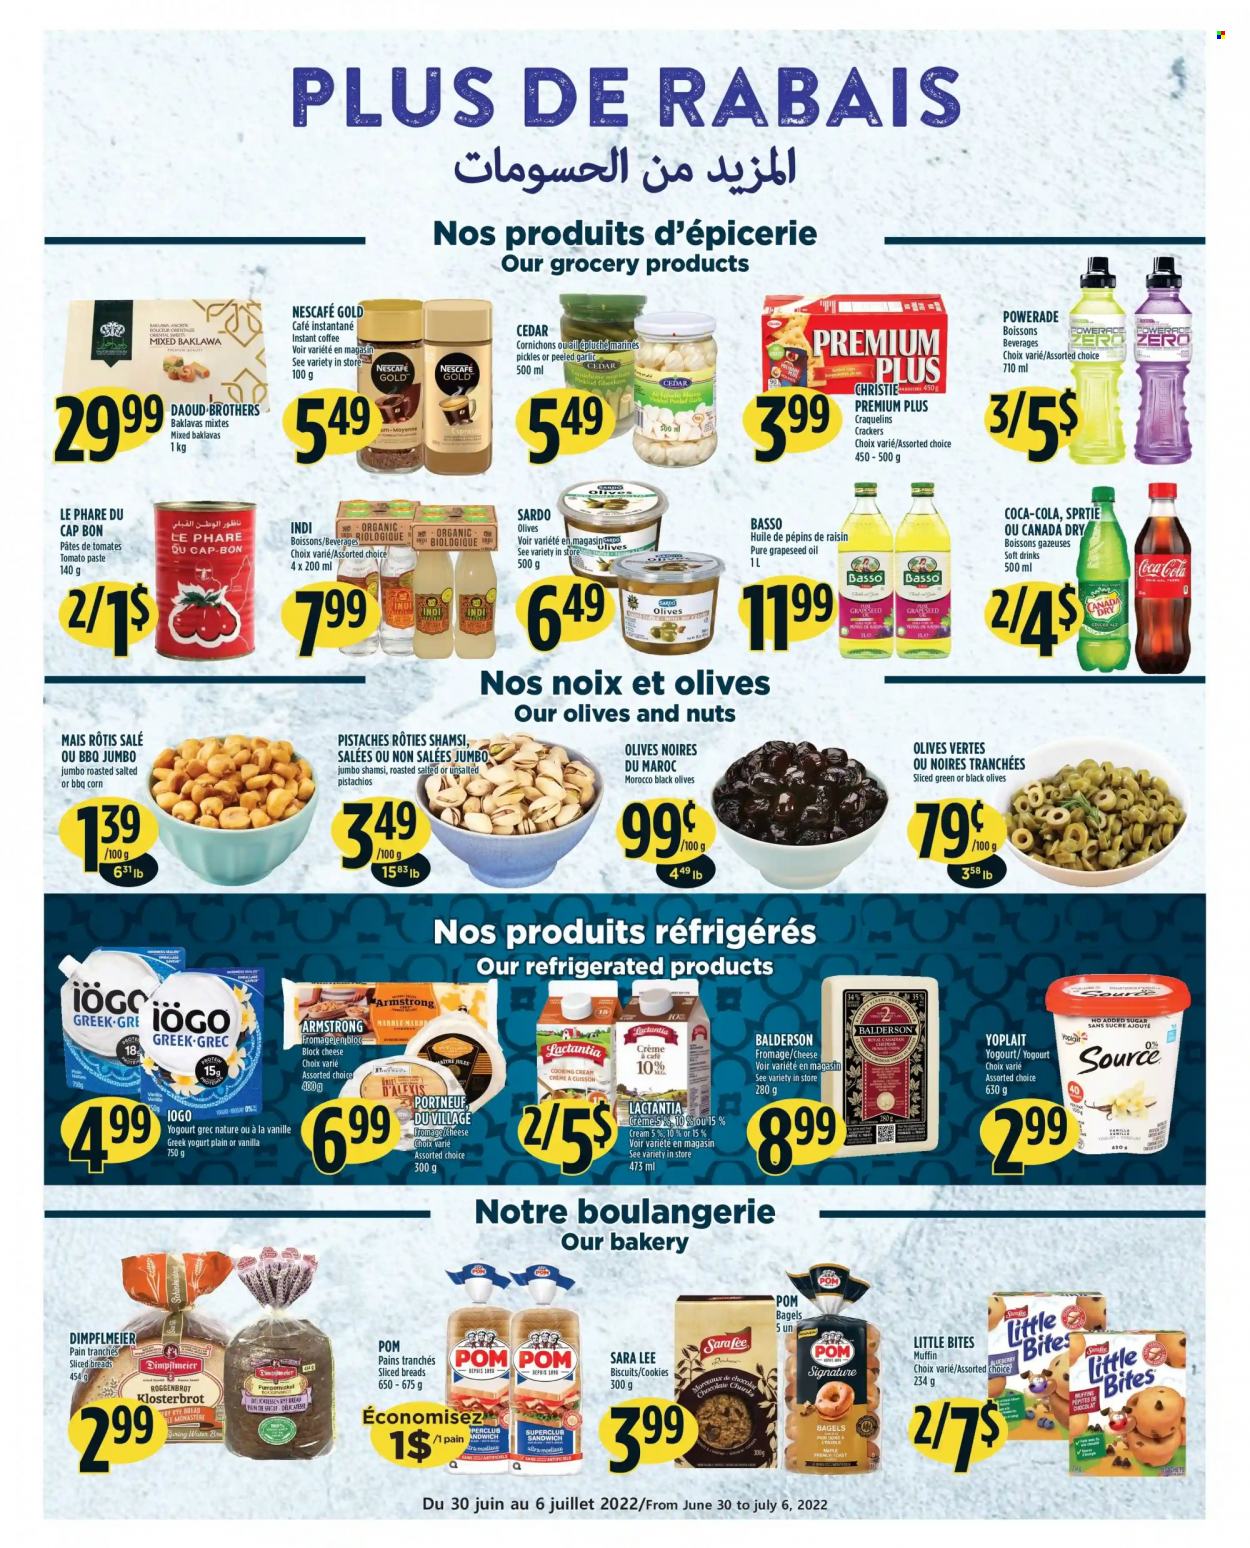 thumbnail - Adonis Flyer - June 30, 2022 - July 06, 2022 - Sales products - bagels, bread, Sara Lee, muffin, corn, garlic, sandwich, cheese, greek yoghurt, yoghurt, Yoplait, cookies, chocolate, crackers, biscuit, Little Bites, tomato paste, pickles, oil, grape seed oil, pistachios, Canada Dry, Coca-Cola, ginger ale, Powerade, soft drink, spring water, instant coffee, BROTHERS, olives, Nescafé. Page 8.